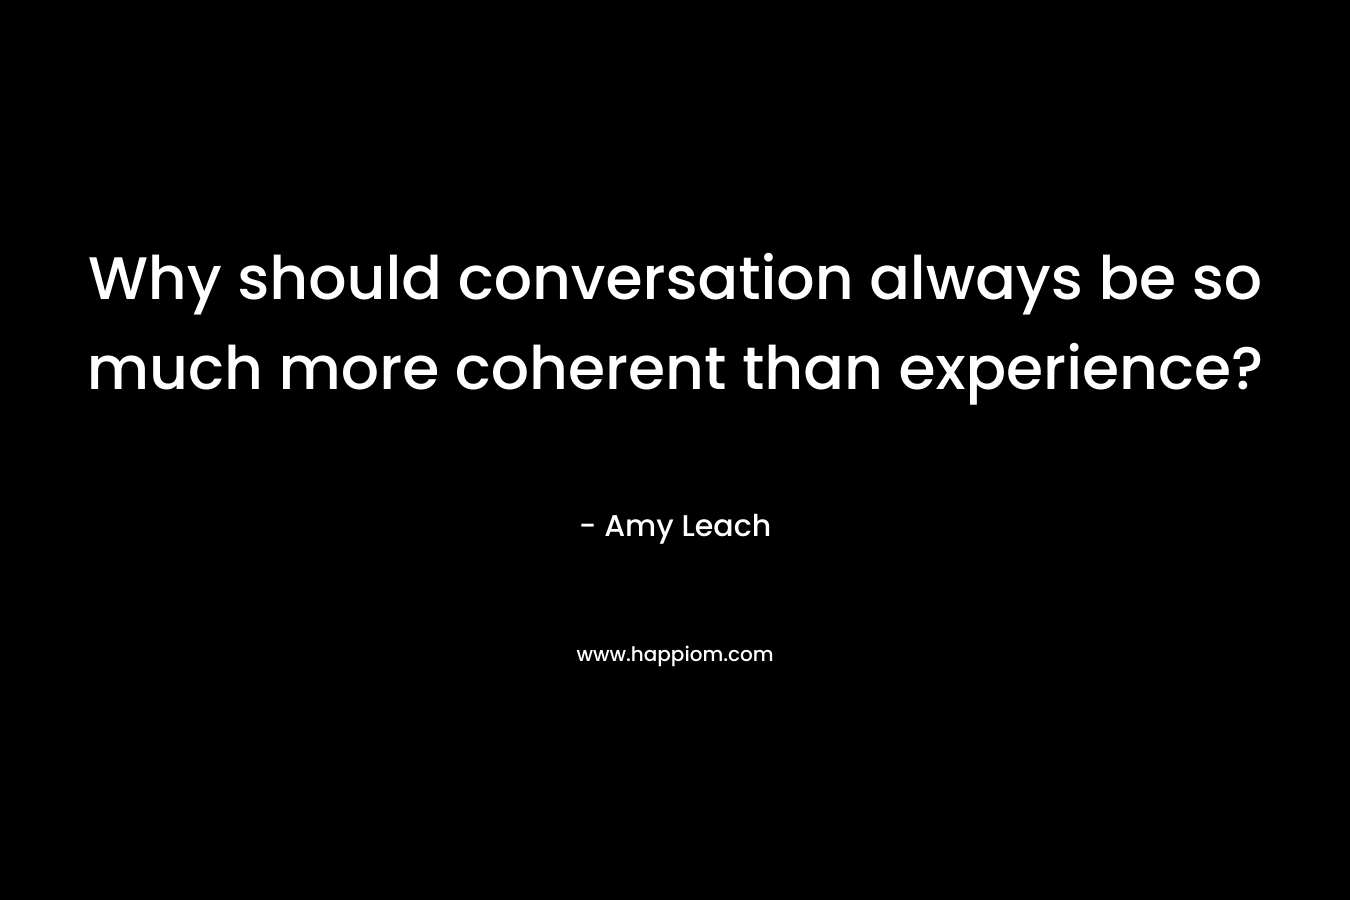 Why should conversation always be so much more coherent than experience?